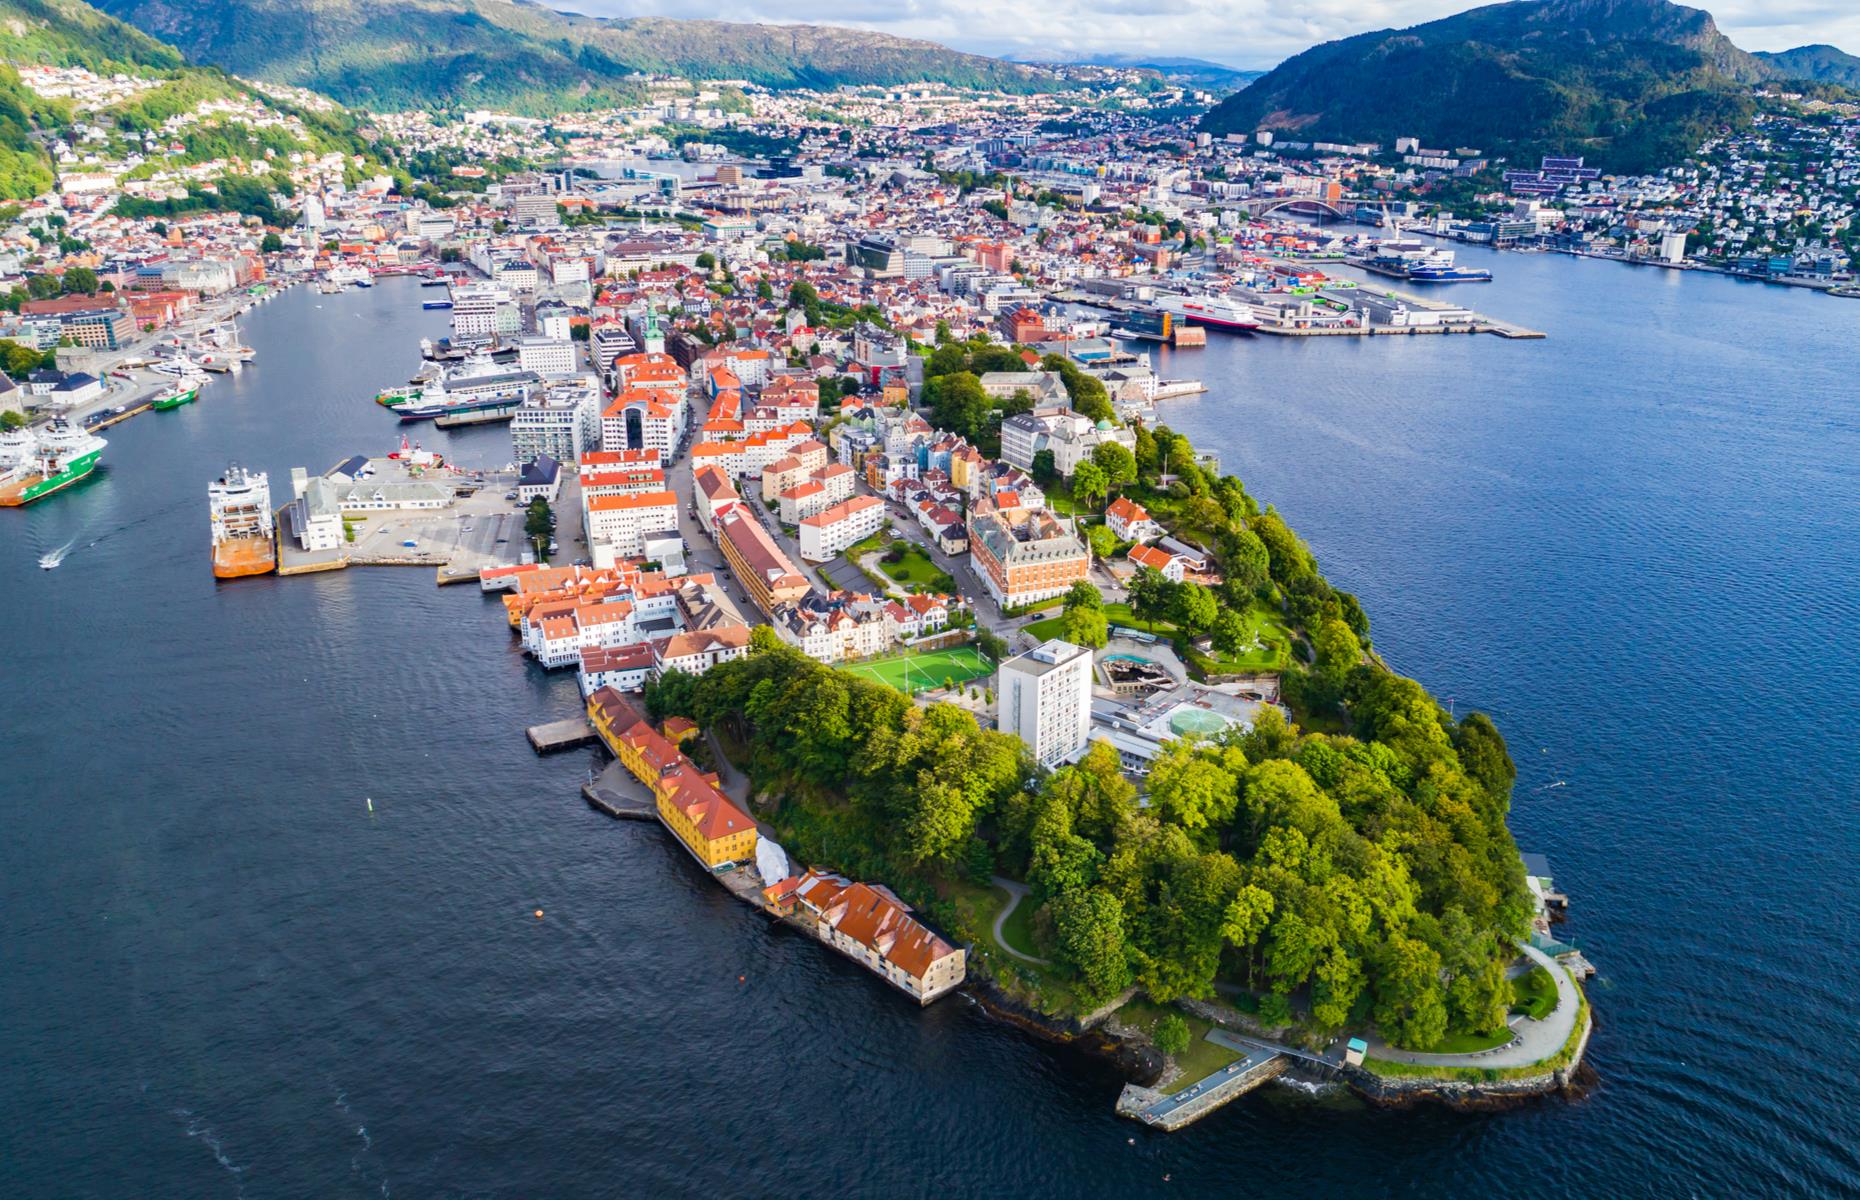 Usually among the most popular cruise destinations in Europe, the Port of Bergen, Norway’s second largest port, is the gateway to the country’s beautiful fjords. The city is charming in its own right too, with houses nestled into hilltops and steep, narrow alleyways, as well as the UNESCO World Heritage Site Bryggen, a historic wharf.